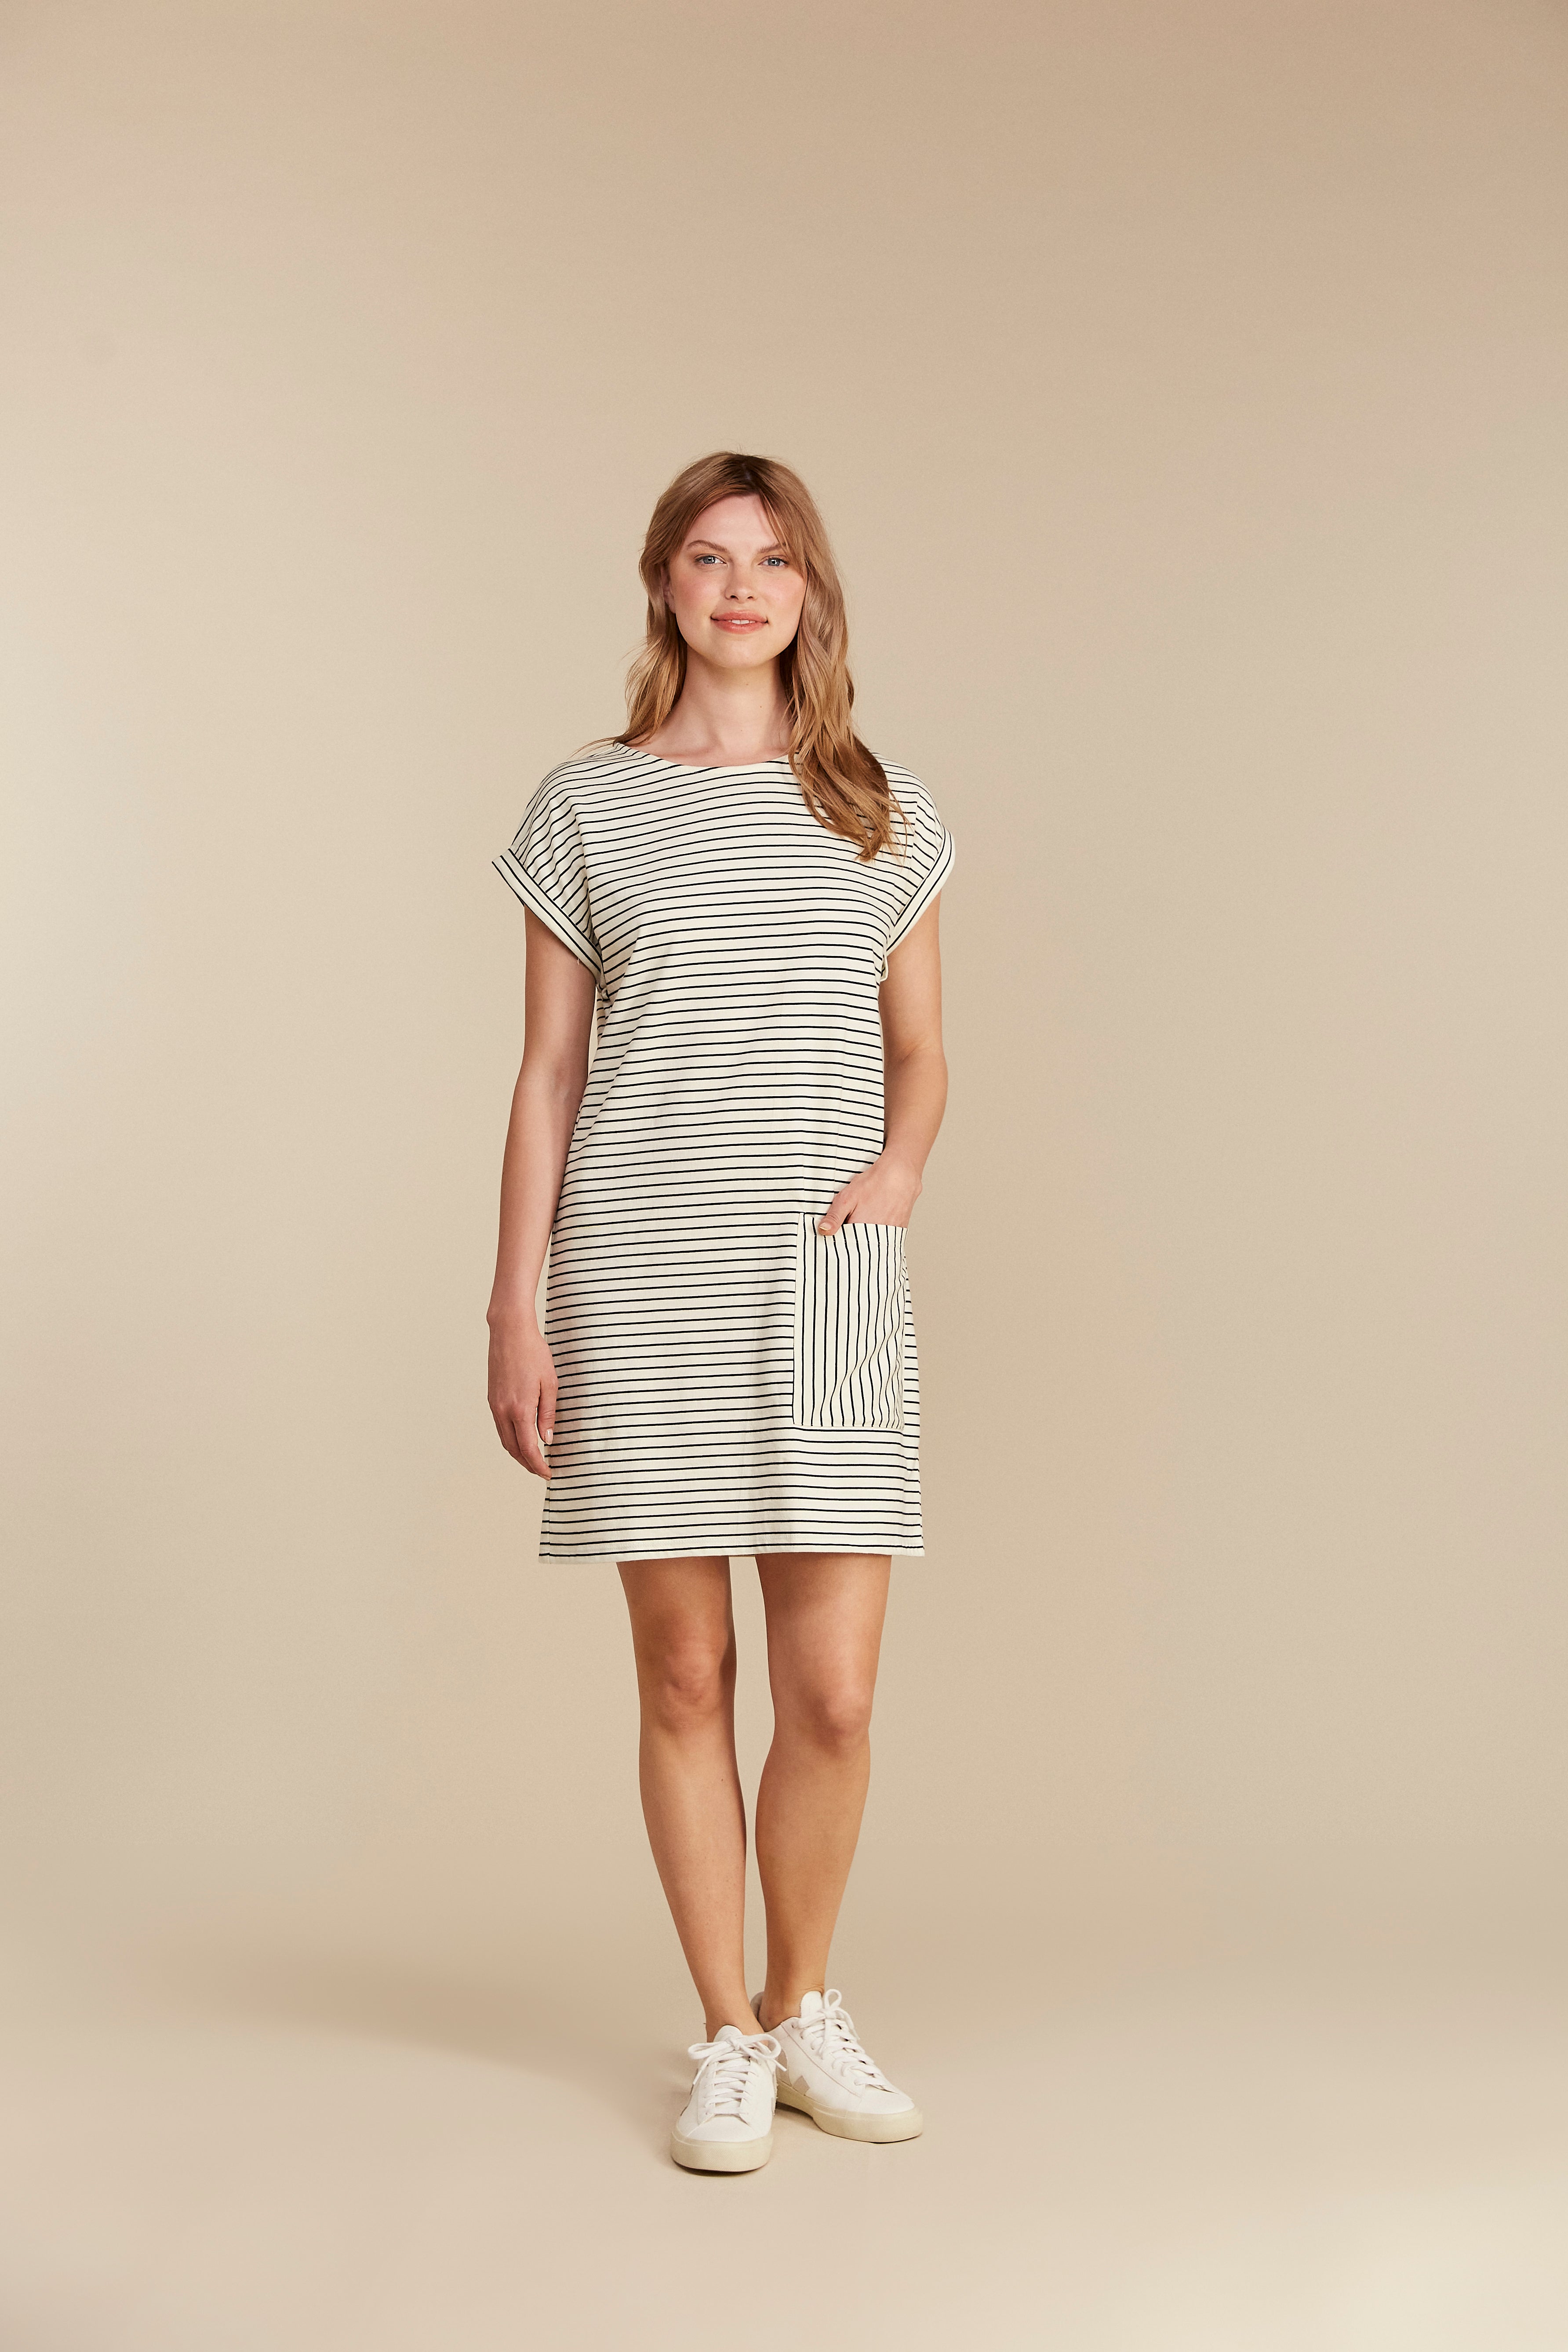 Camber Striped Dress in Navy